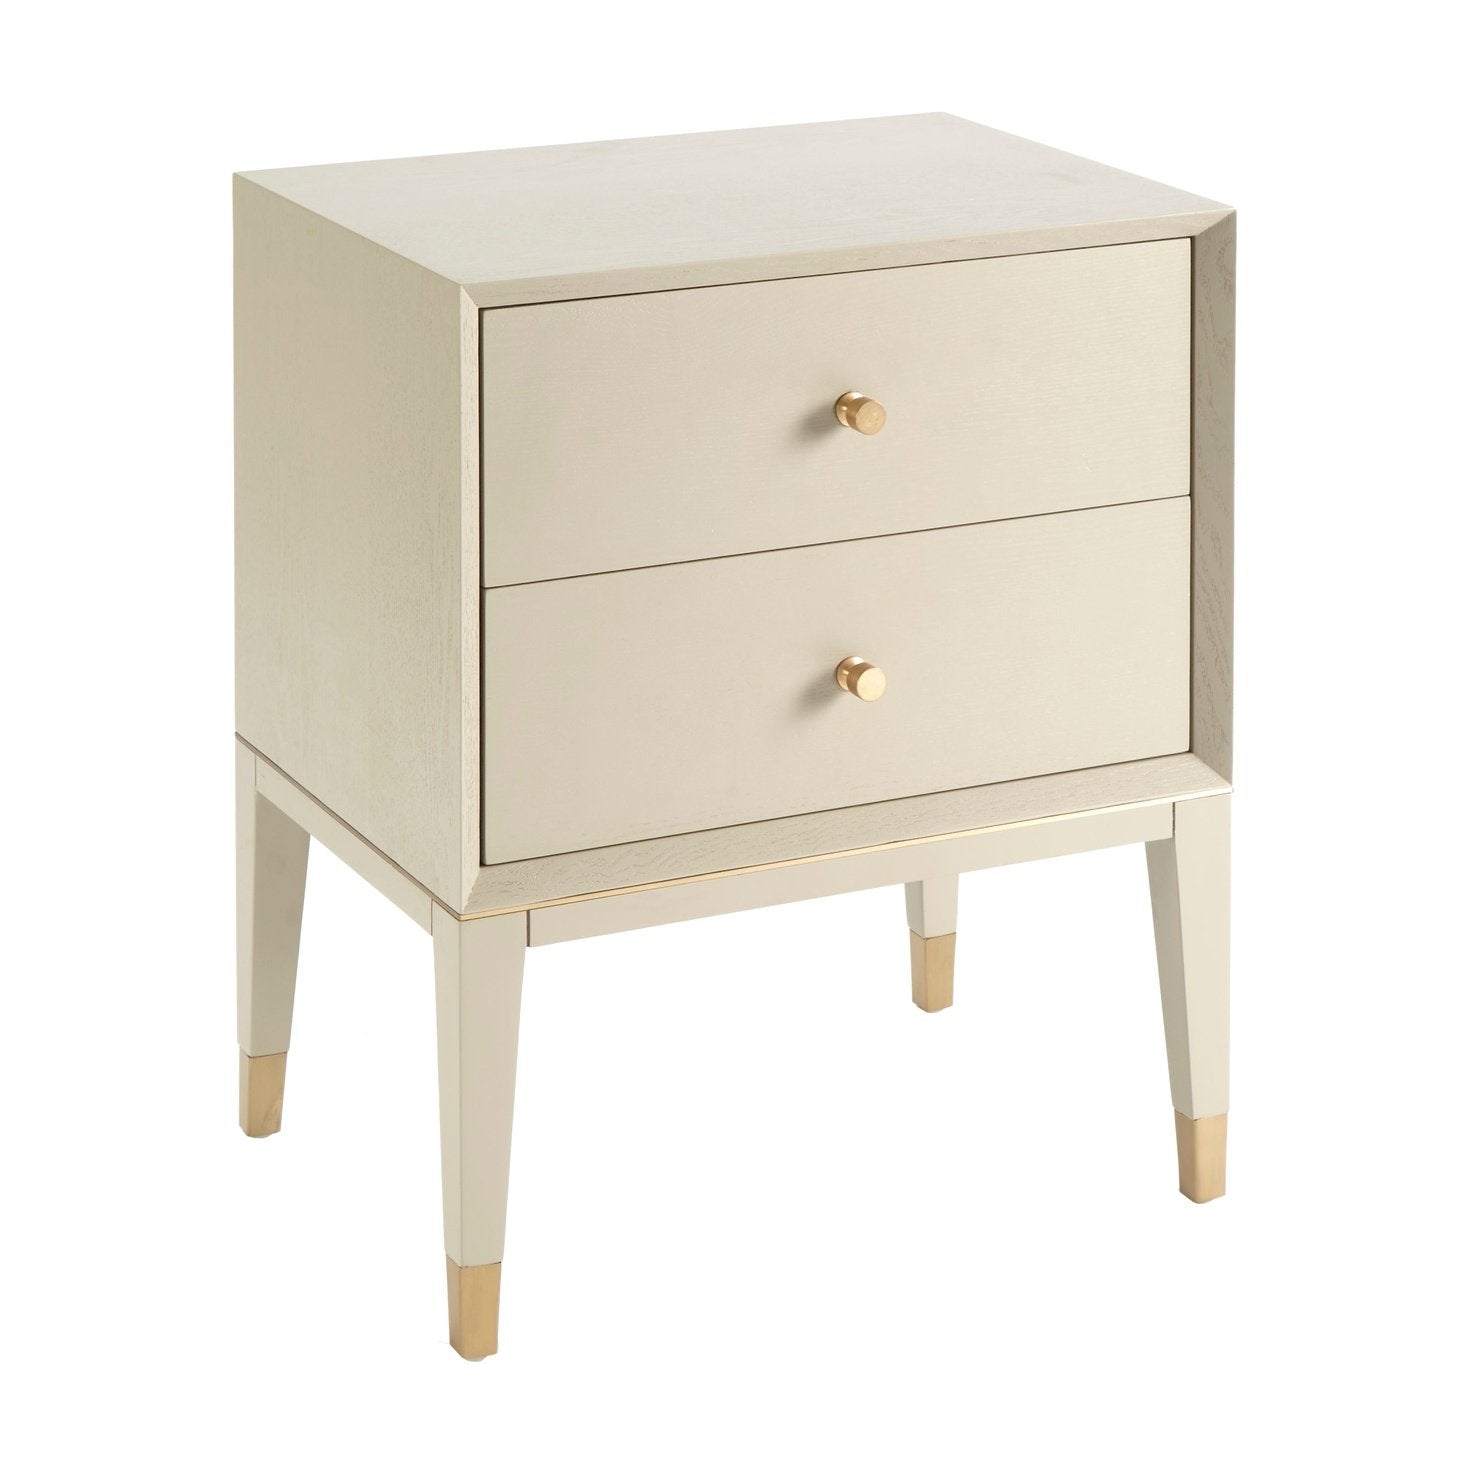 Bayou 2 Drawer White Bedside Table Brass Handles